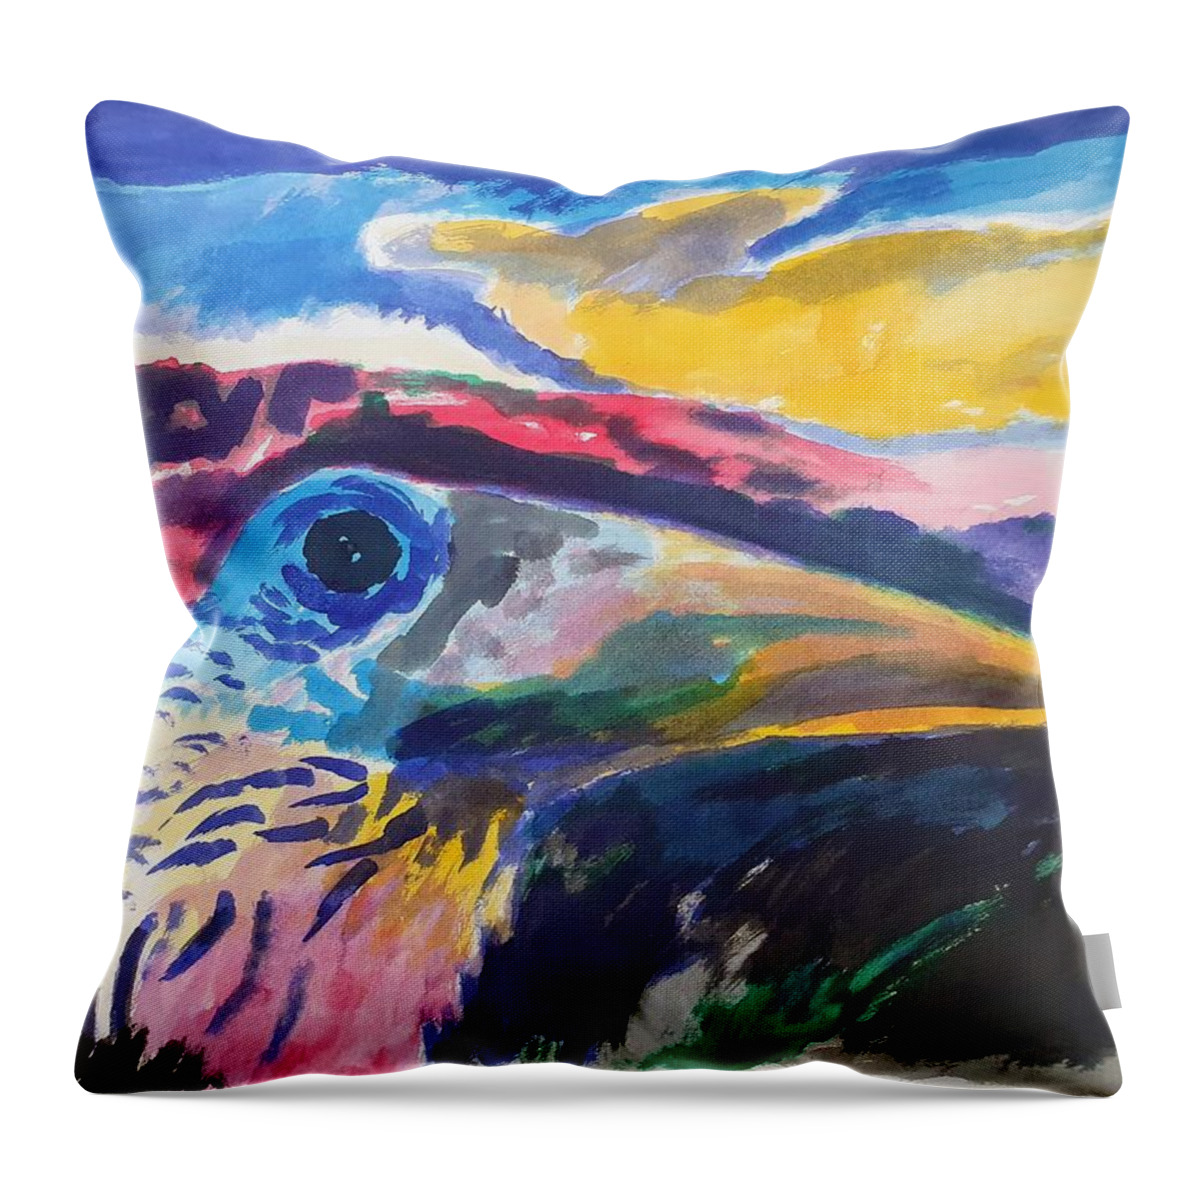 Tucano Throw Pillow featuring the painting L'occhio del tucano by Enrico Garff